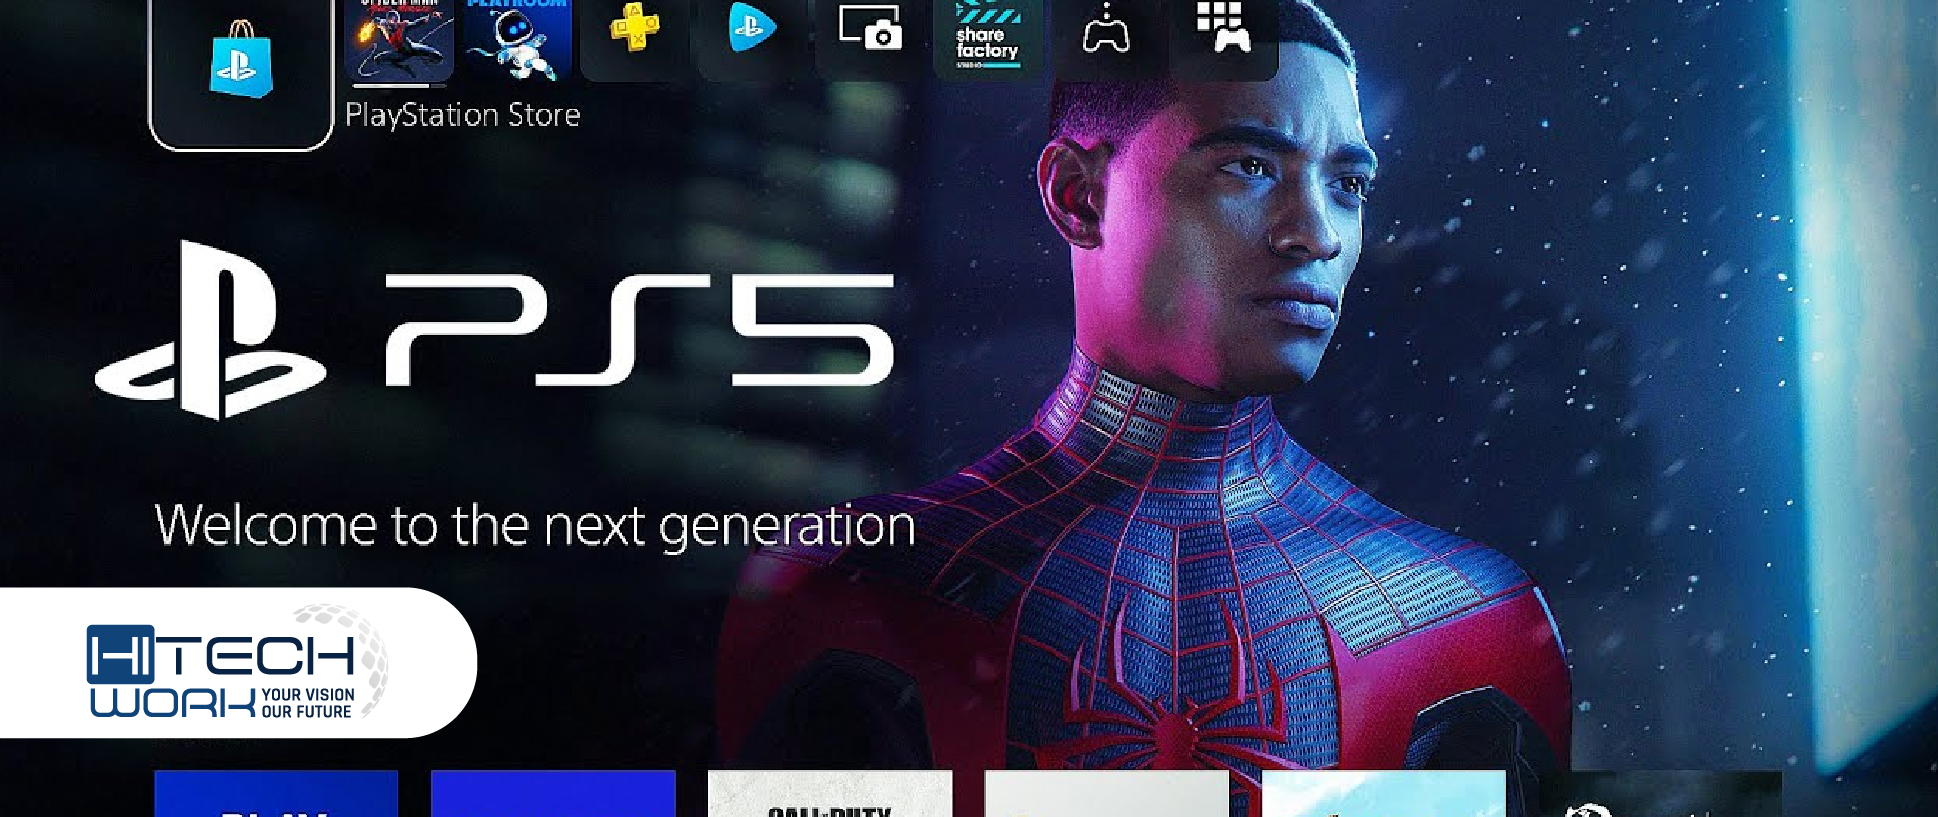 How To Customize PS5 Home Screen